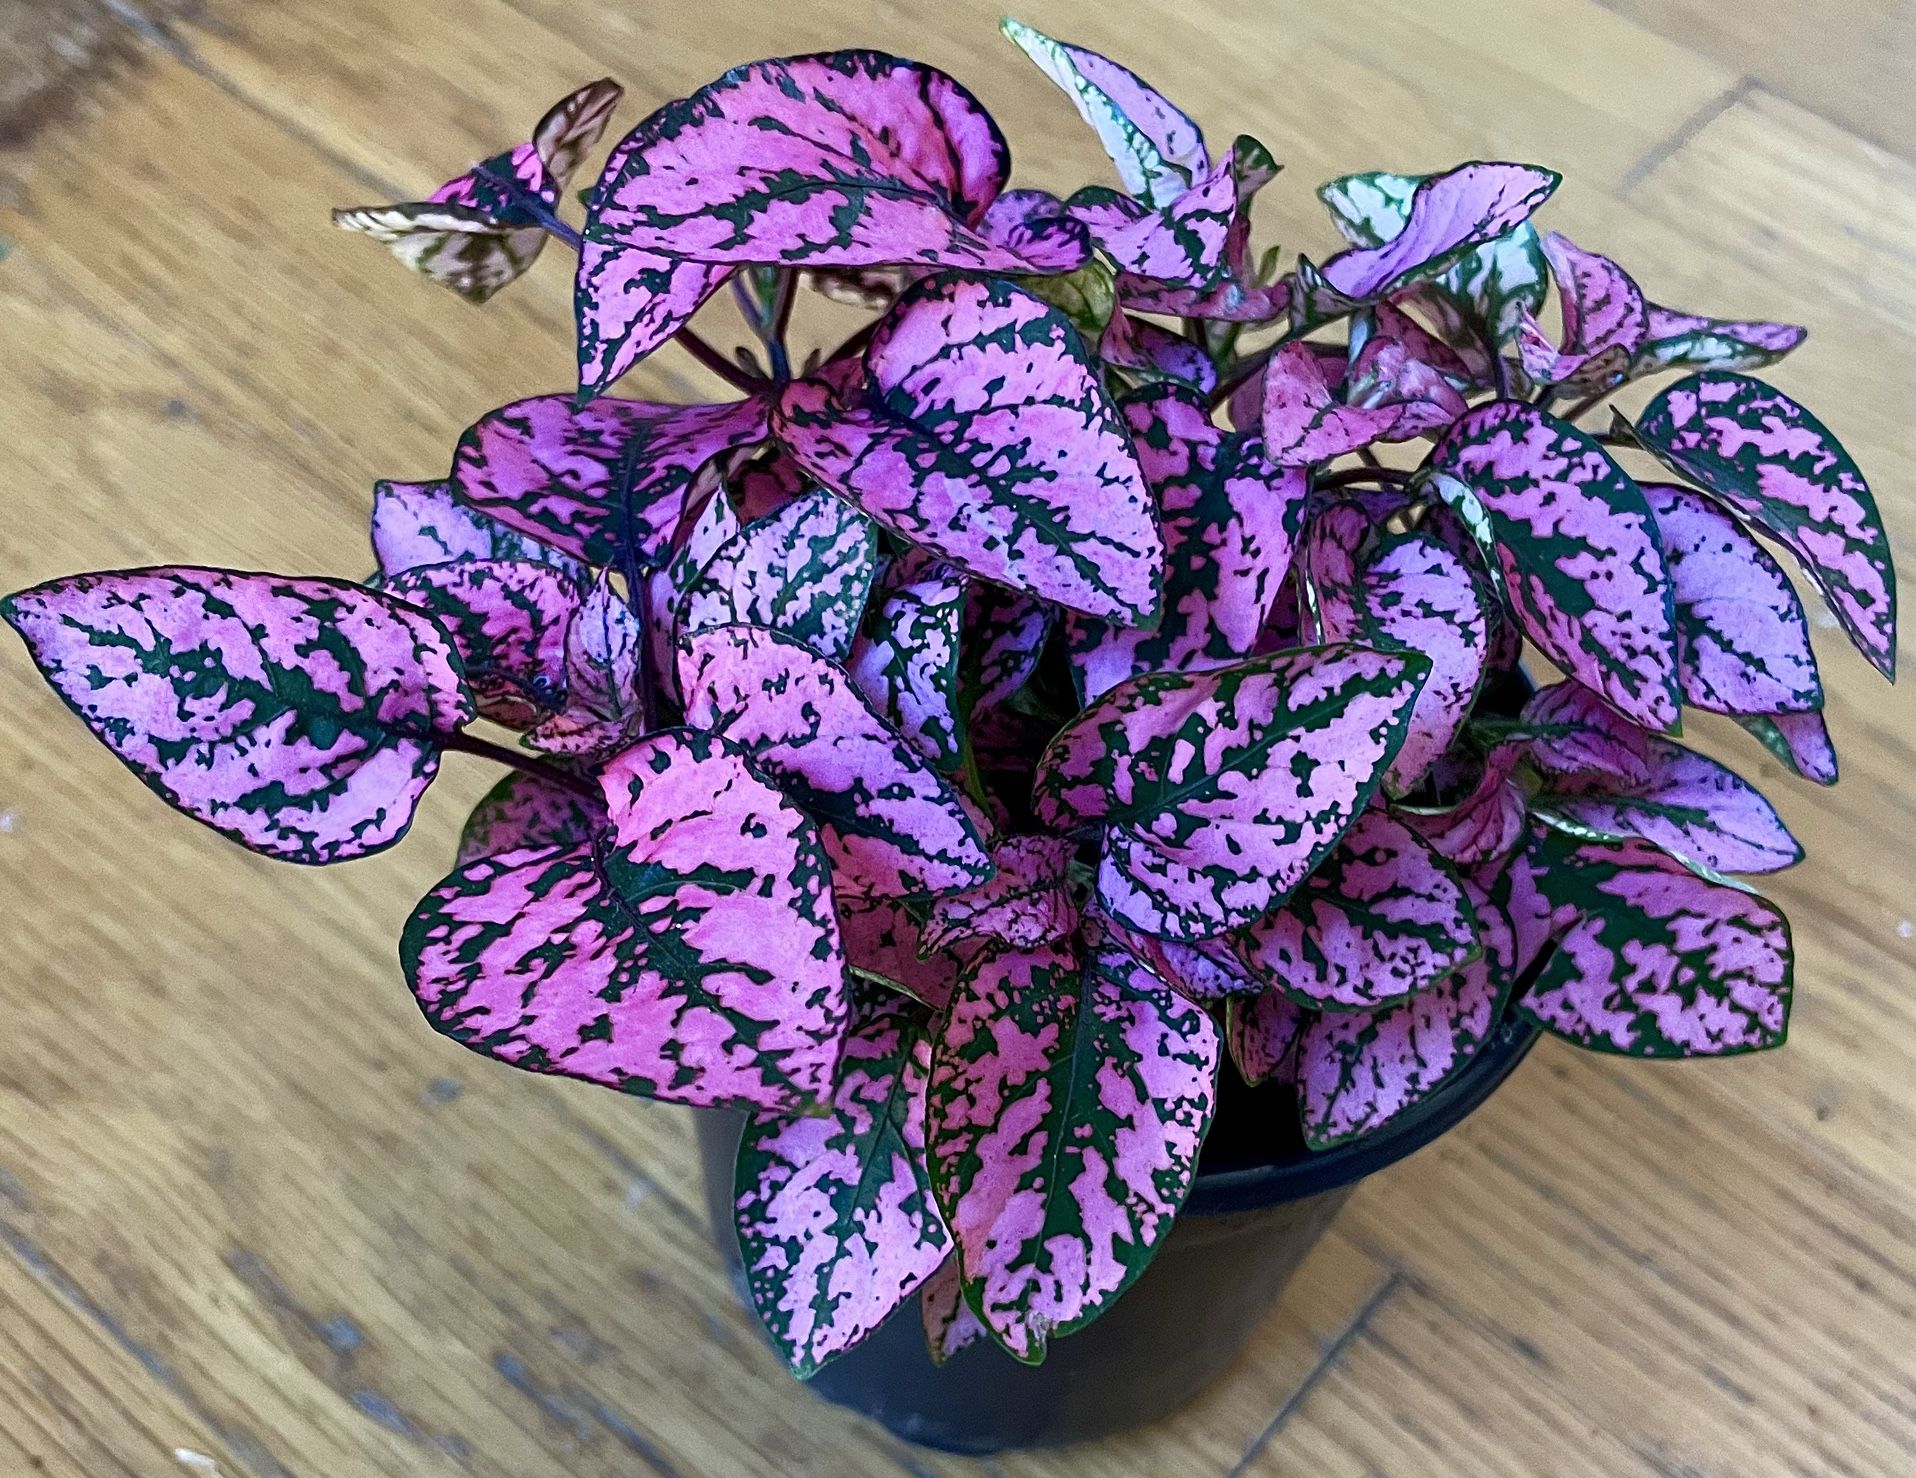 Non-Toxic Polka Dot Plant / Pet Friendly / Free Delivery Available 